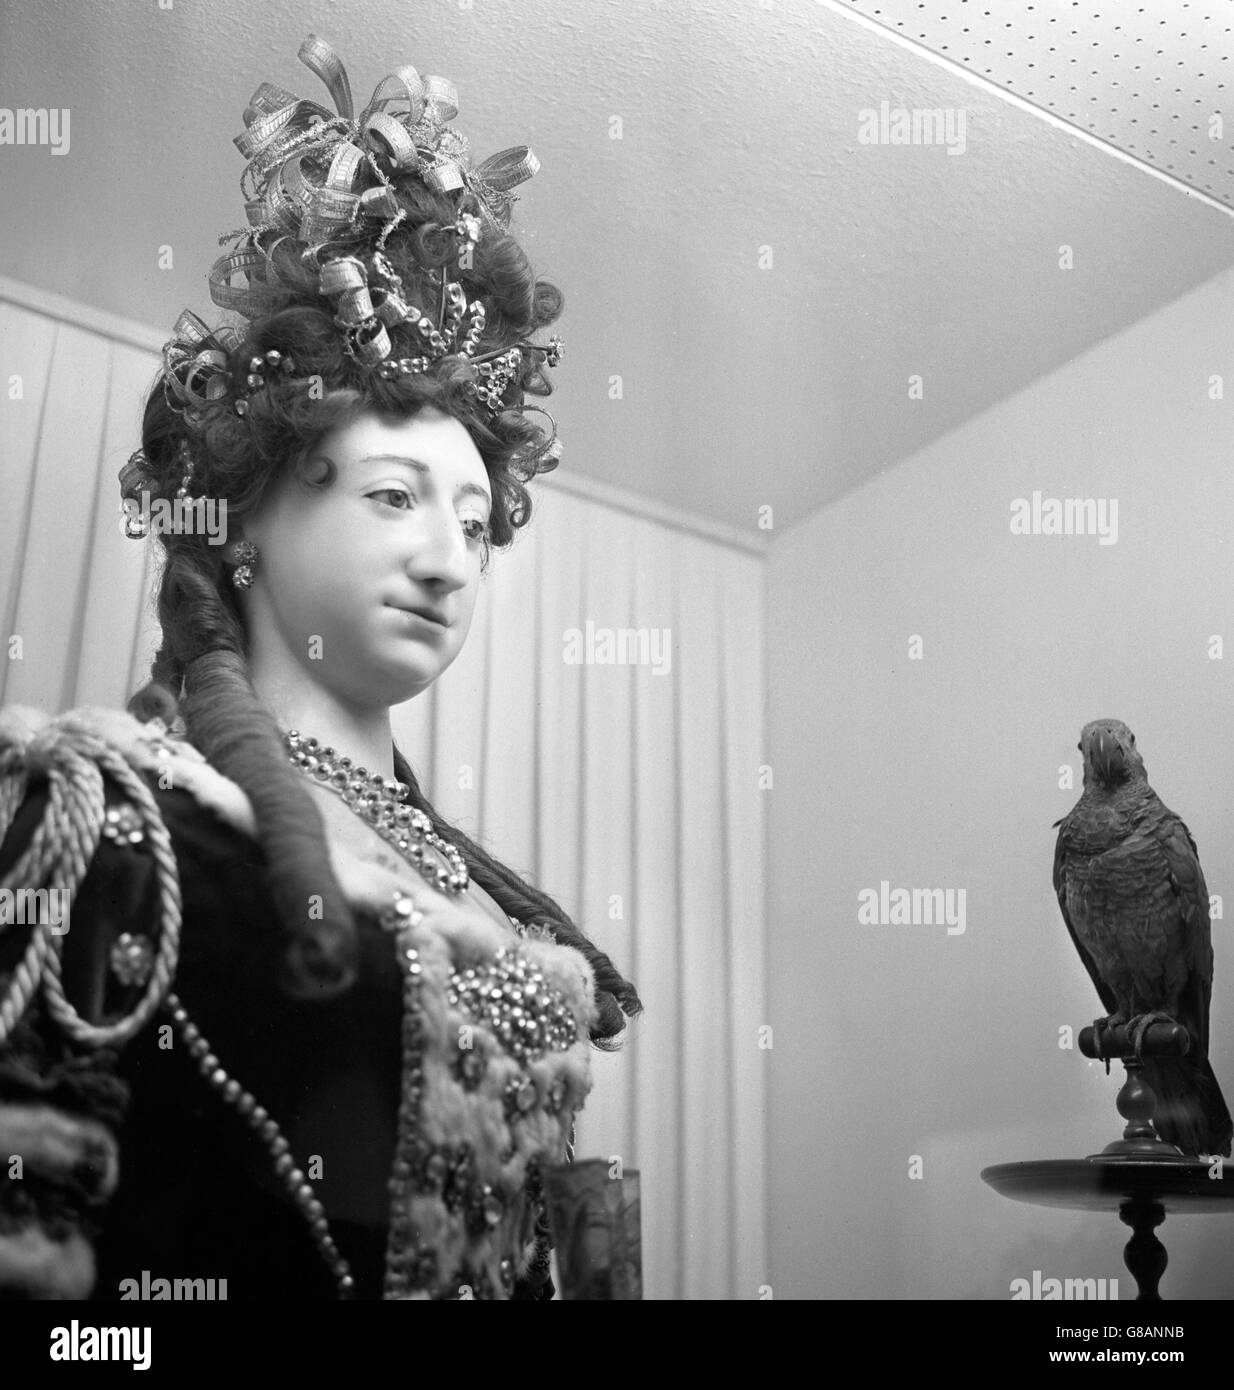 Clothes worn by Frances, Duchess of Richmond and Lennox, with her actual parrot, are pictured on show in 'The Abbey Treasures' exhibition at Westminster Abbey. The parrot is said to have died two days after the Duchess died and was then stuffed. The exhibition is in connection with the Abbey's 900th anniversary. Stock Photo